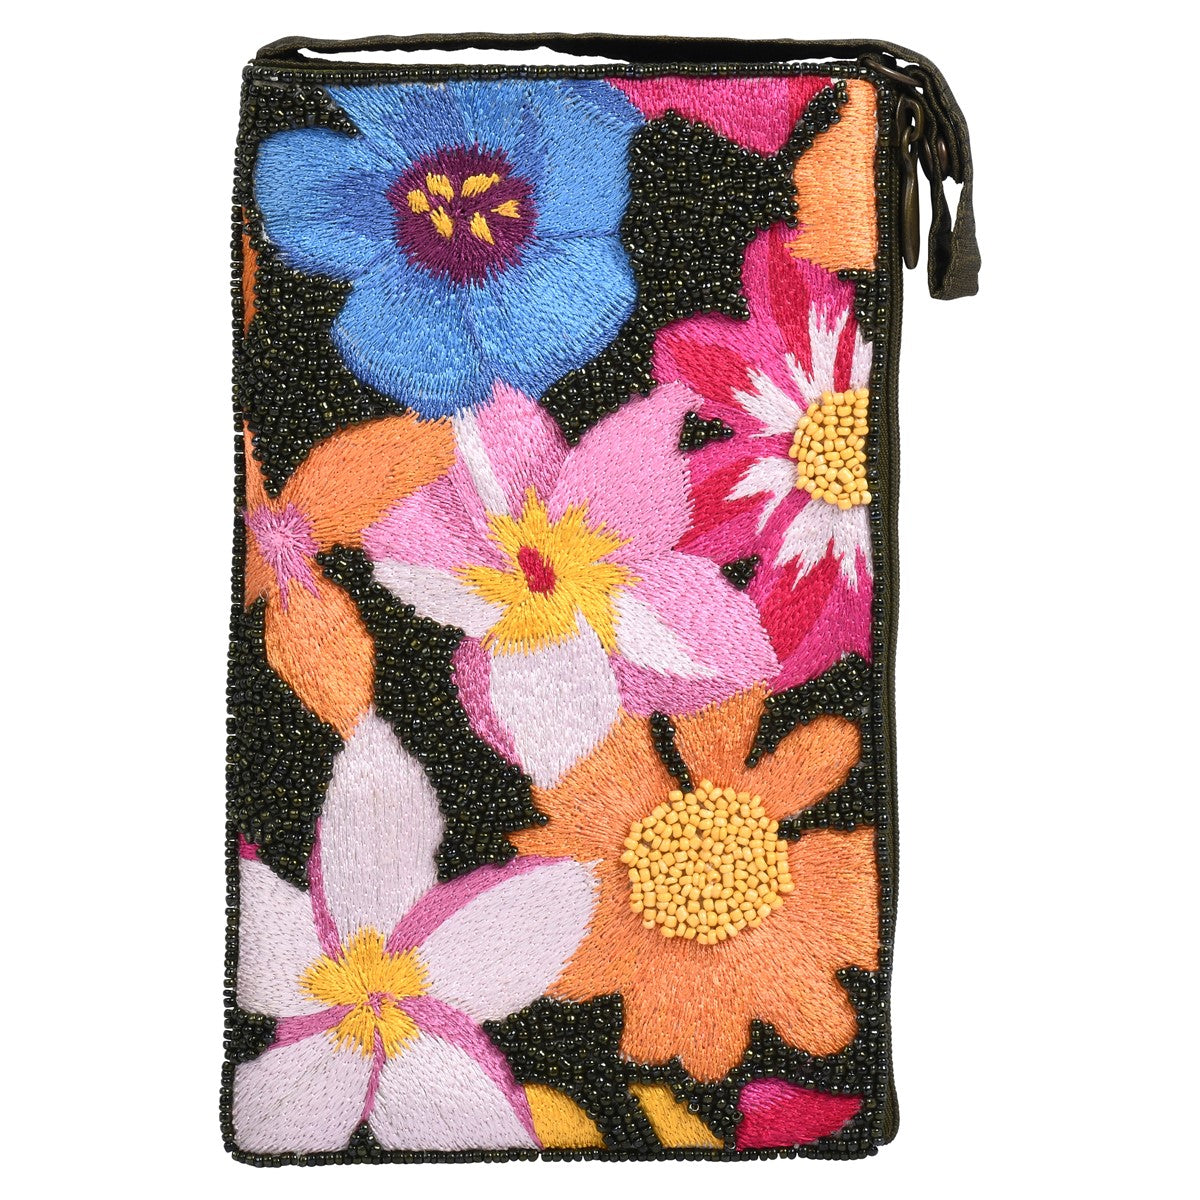 Bamboo Trading Co. Club Bag Tropical Flowers